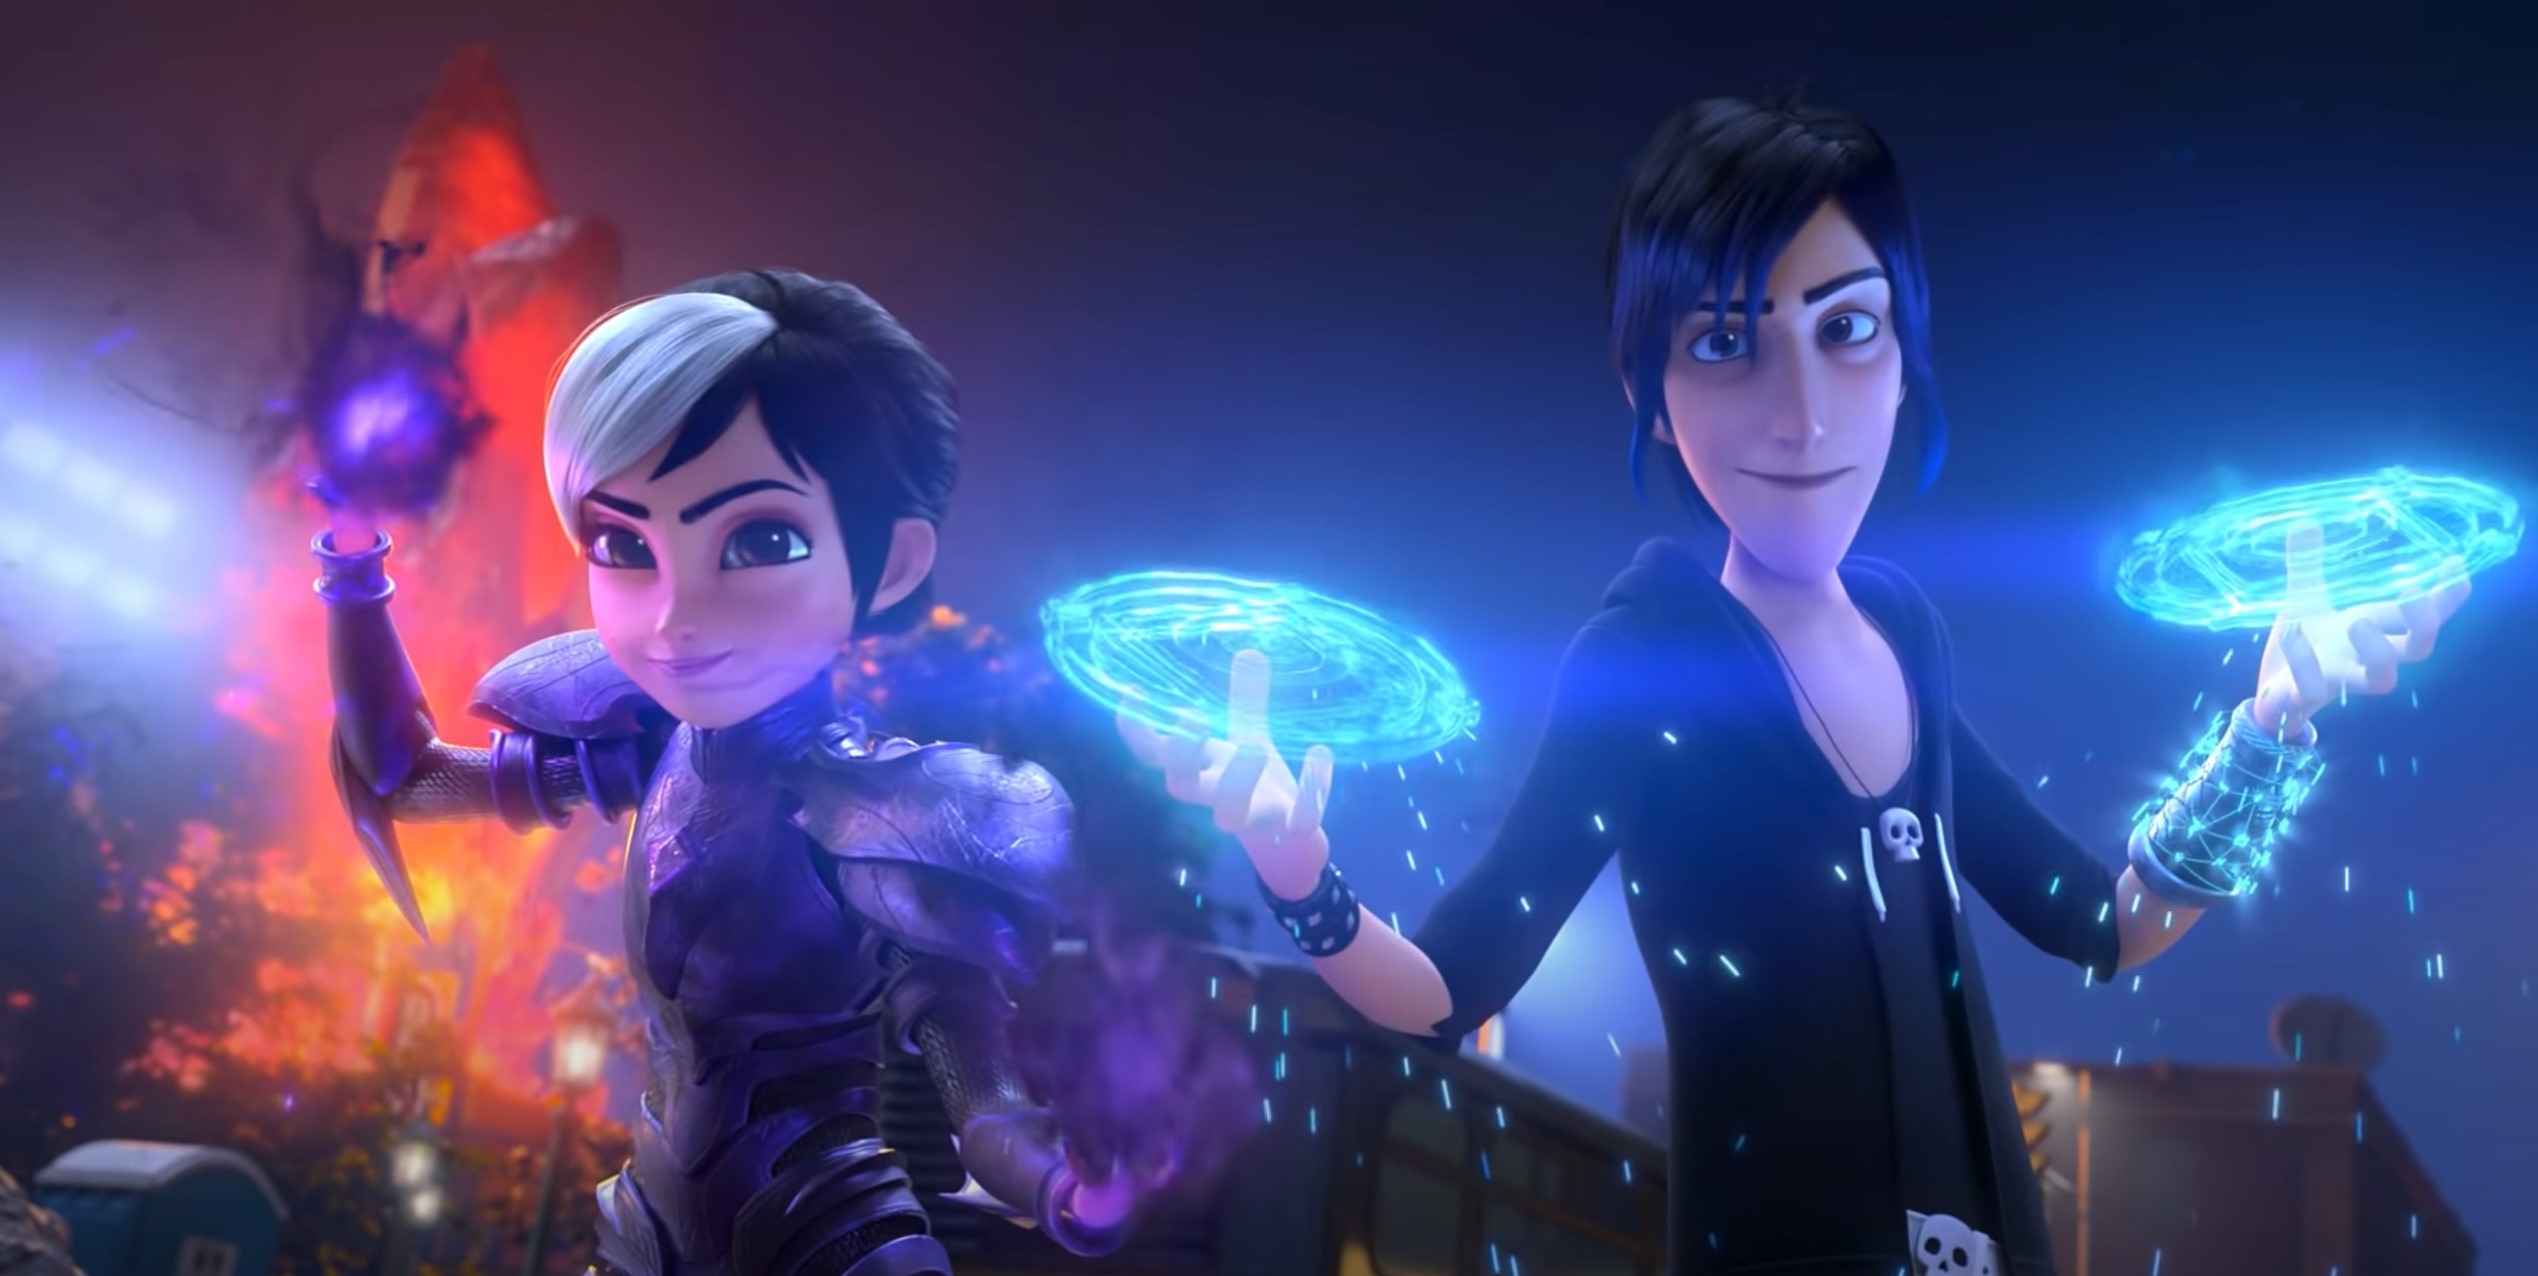 "Trollhunters: Rise of the Titans" Dropping this Wednesday on Netflix! DreamWorks Movie 2021